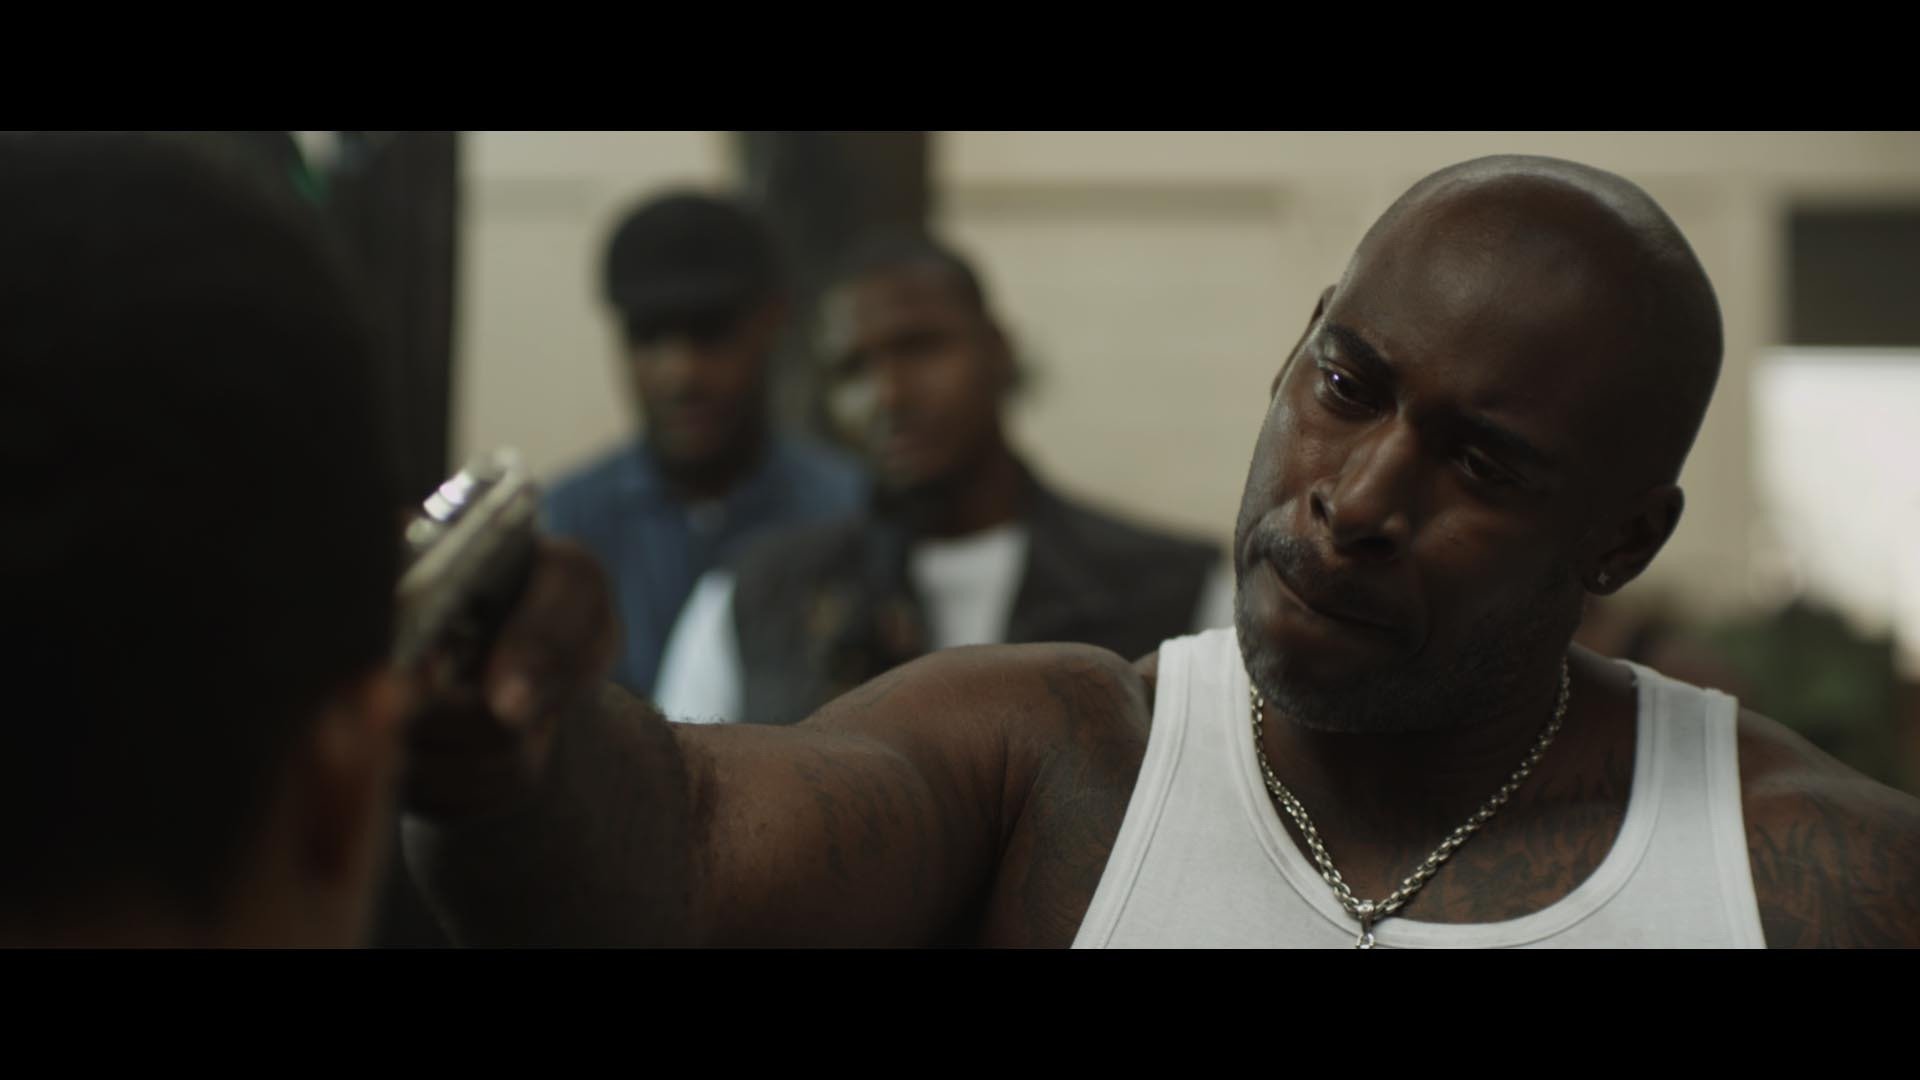 Benzart (Fredi 'Kruga' Nwaka) points a gun at young Cosmo (Miles Wilson) in Callum Andrew Johnston's The Forbidden Note.